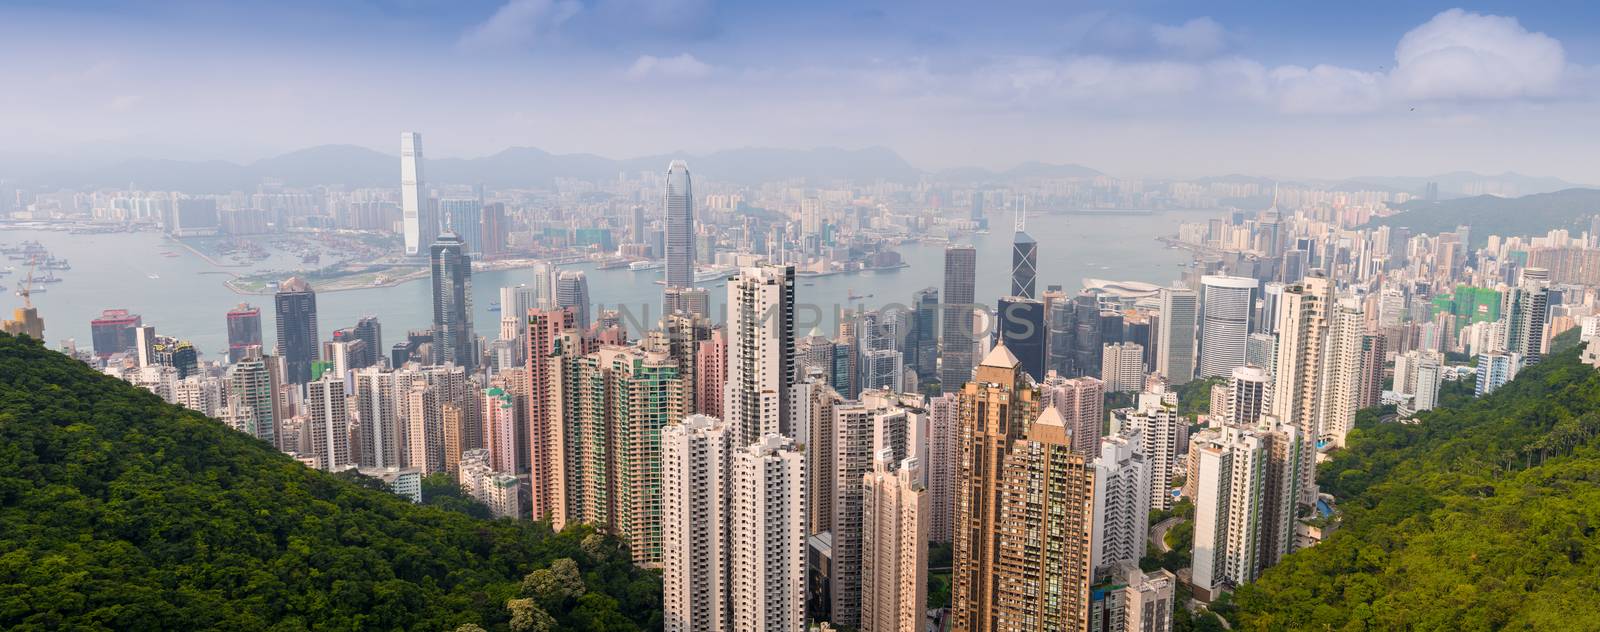 Panoramic view of Hong Kong cityscape on a beautiful sunny day.